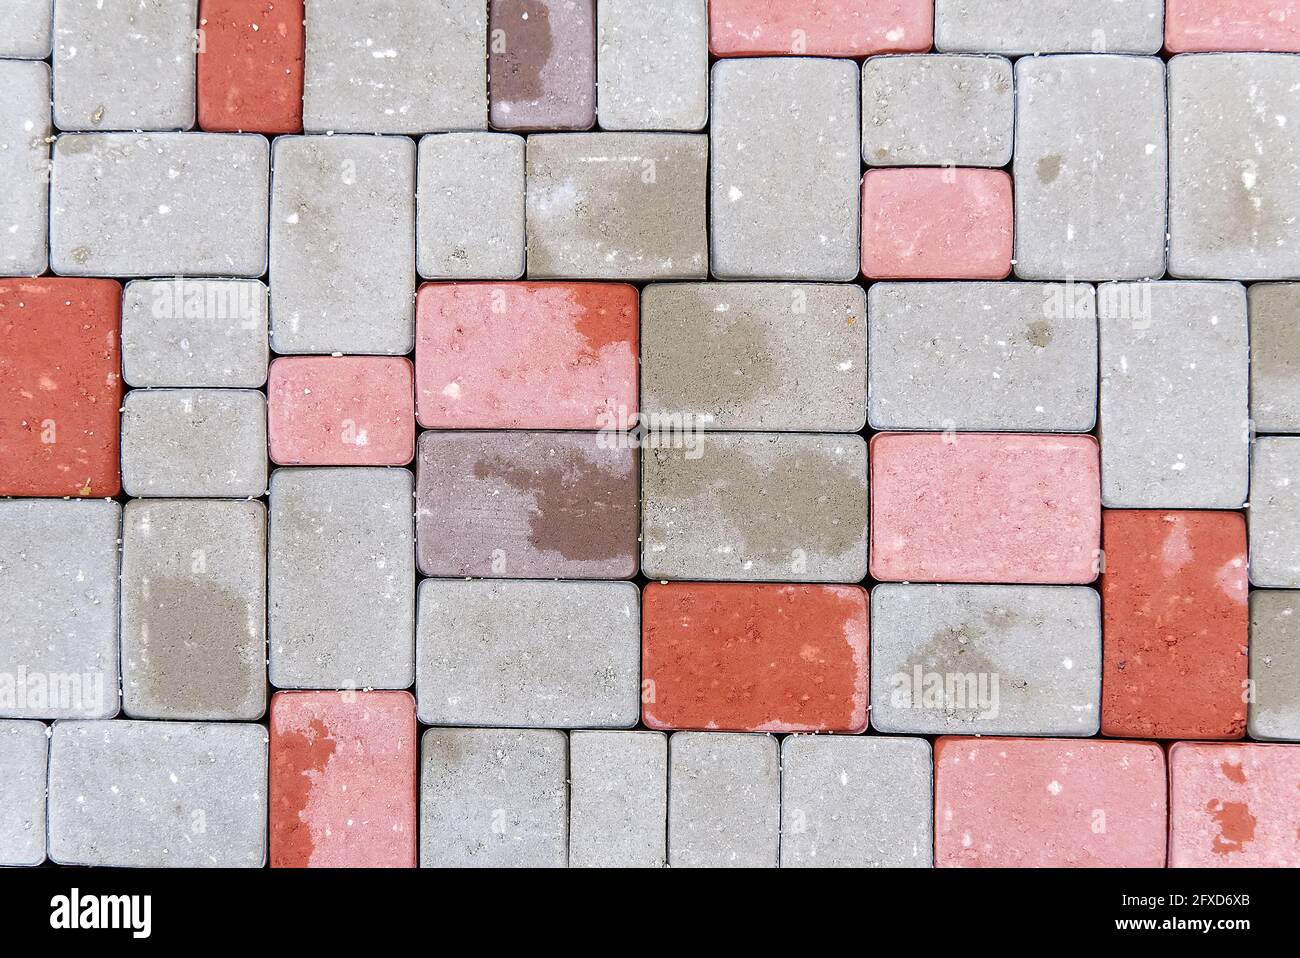 red, gray and brown, paving stones pattern. flat lay. Stock Photo